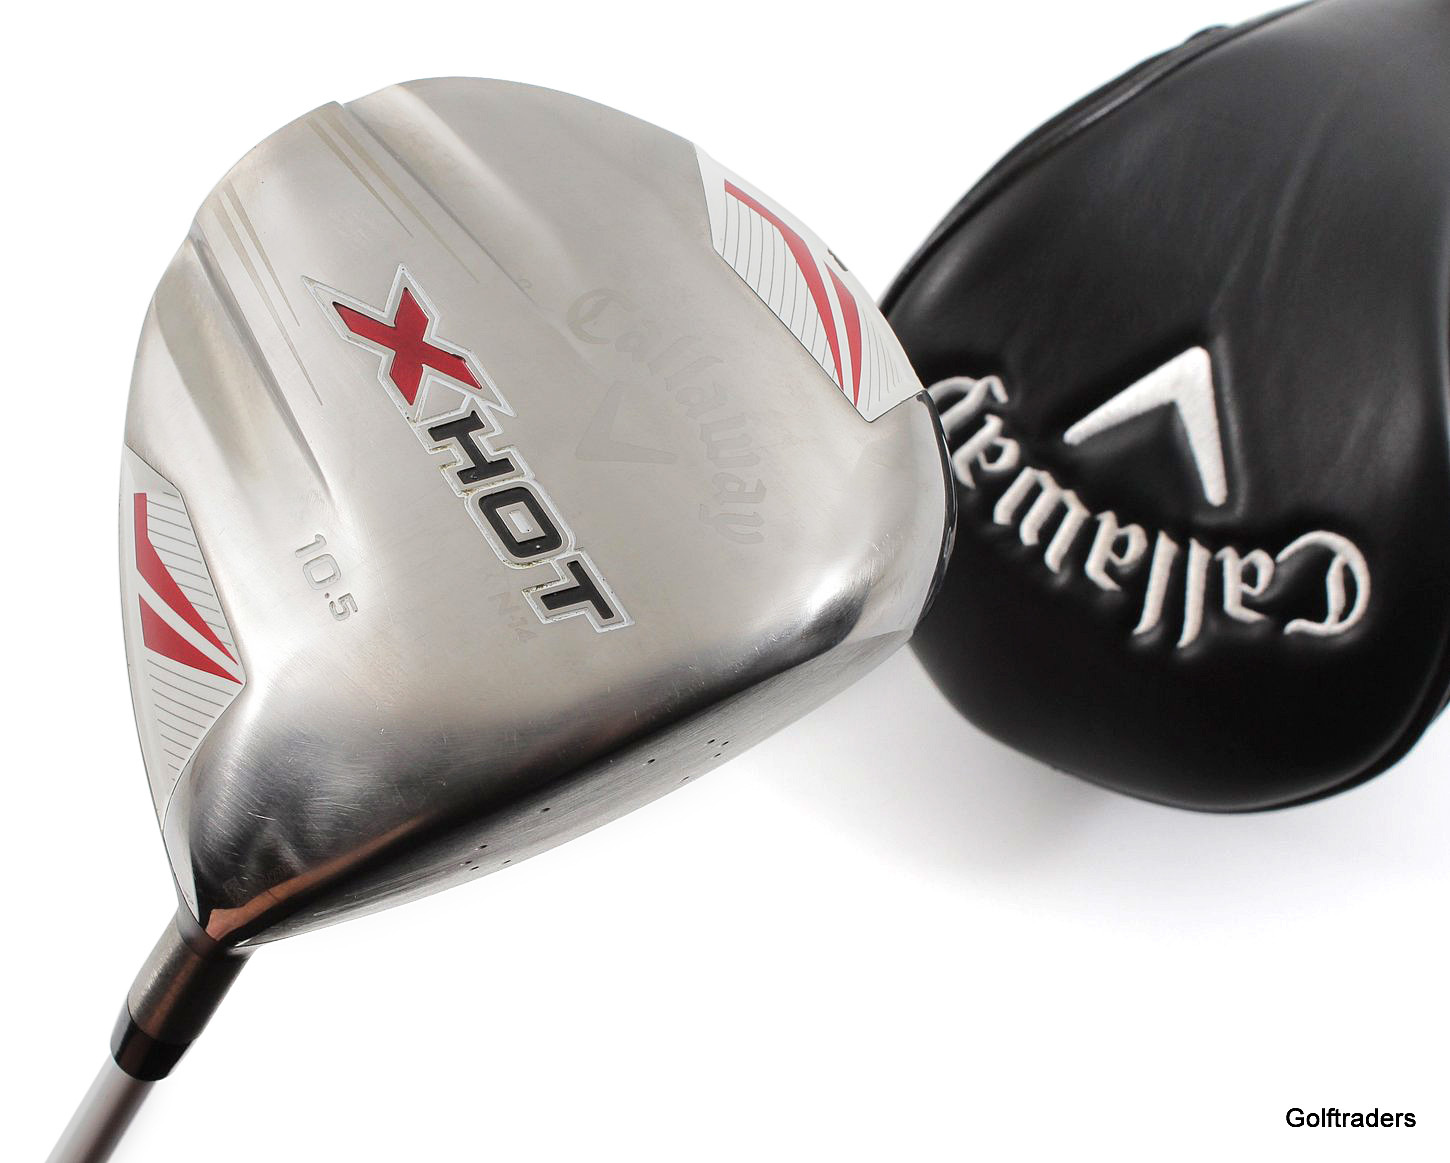 review of callaway x hot driver